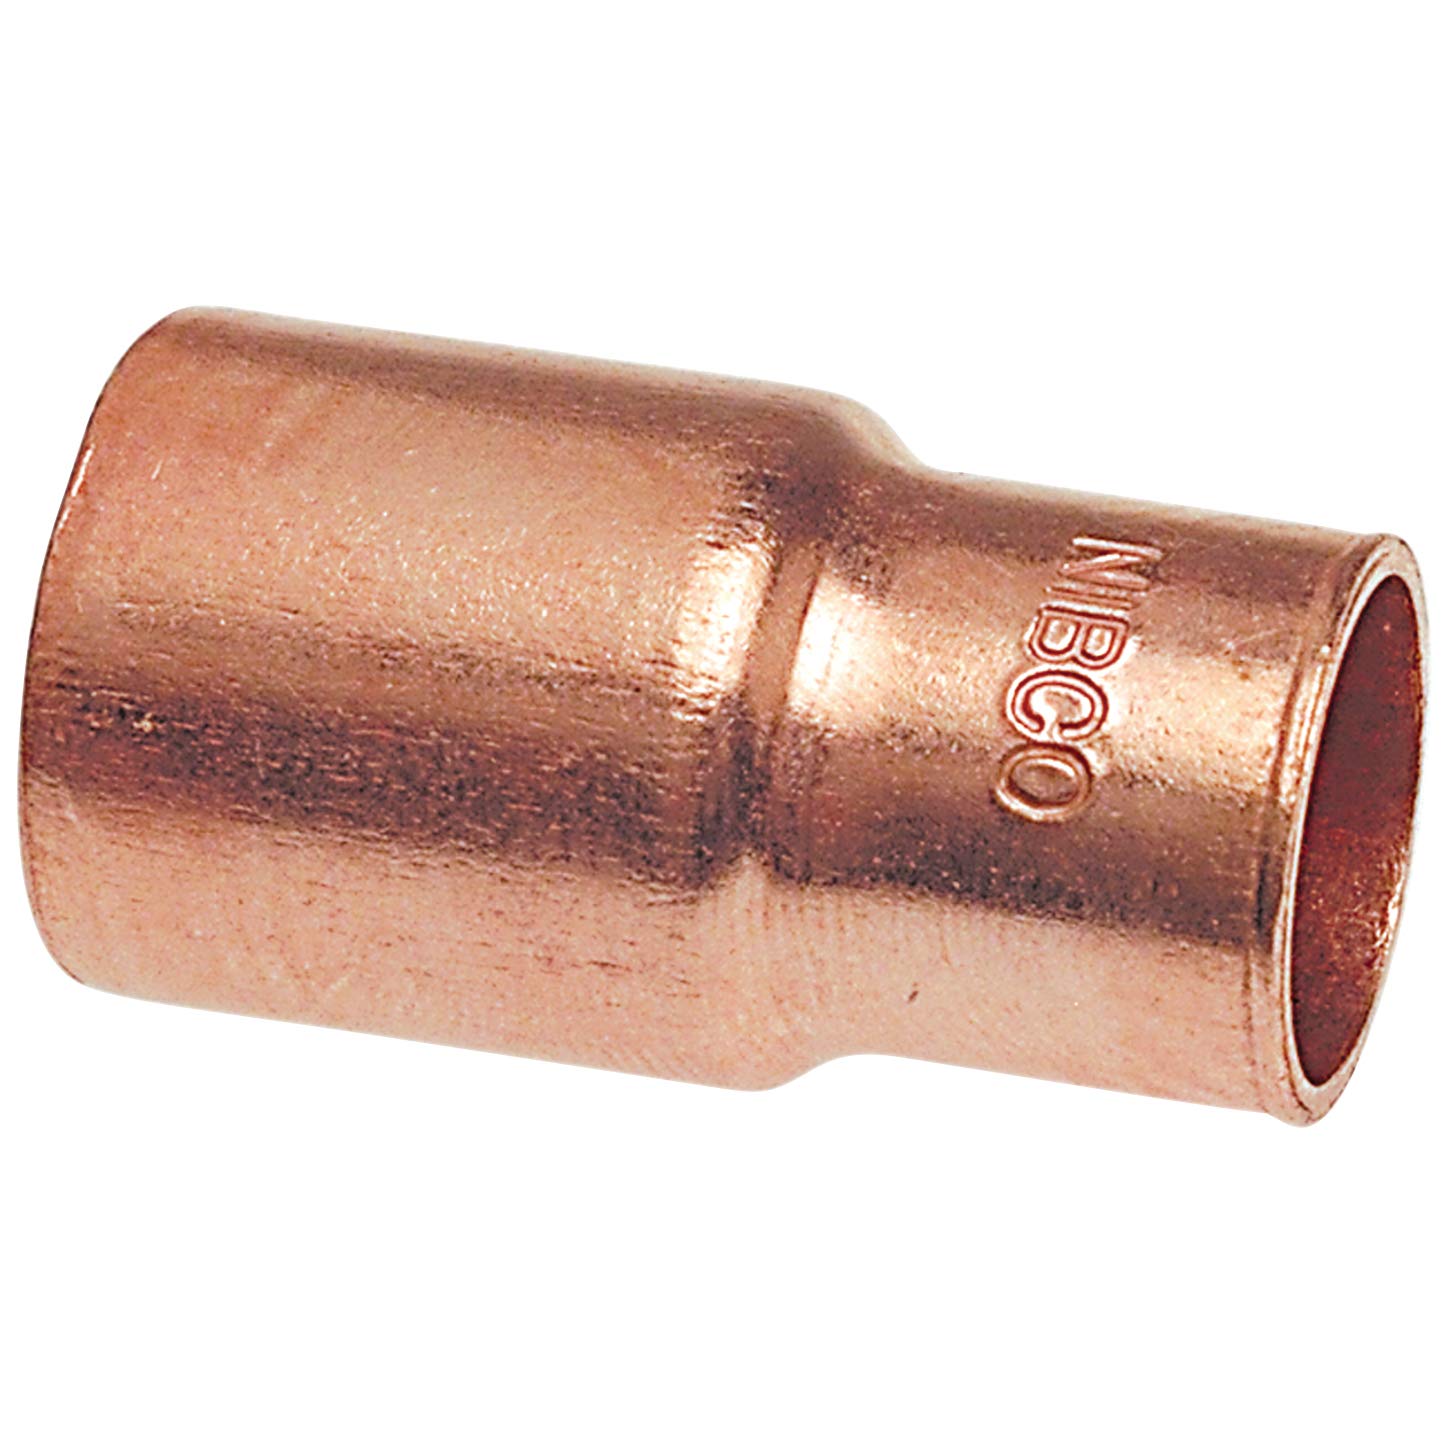 2-1/2" x 1" Fitting Reducer Ftg x C - Wrot Copper, 600-2